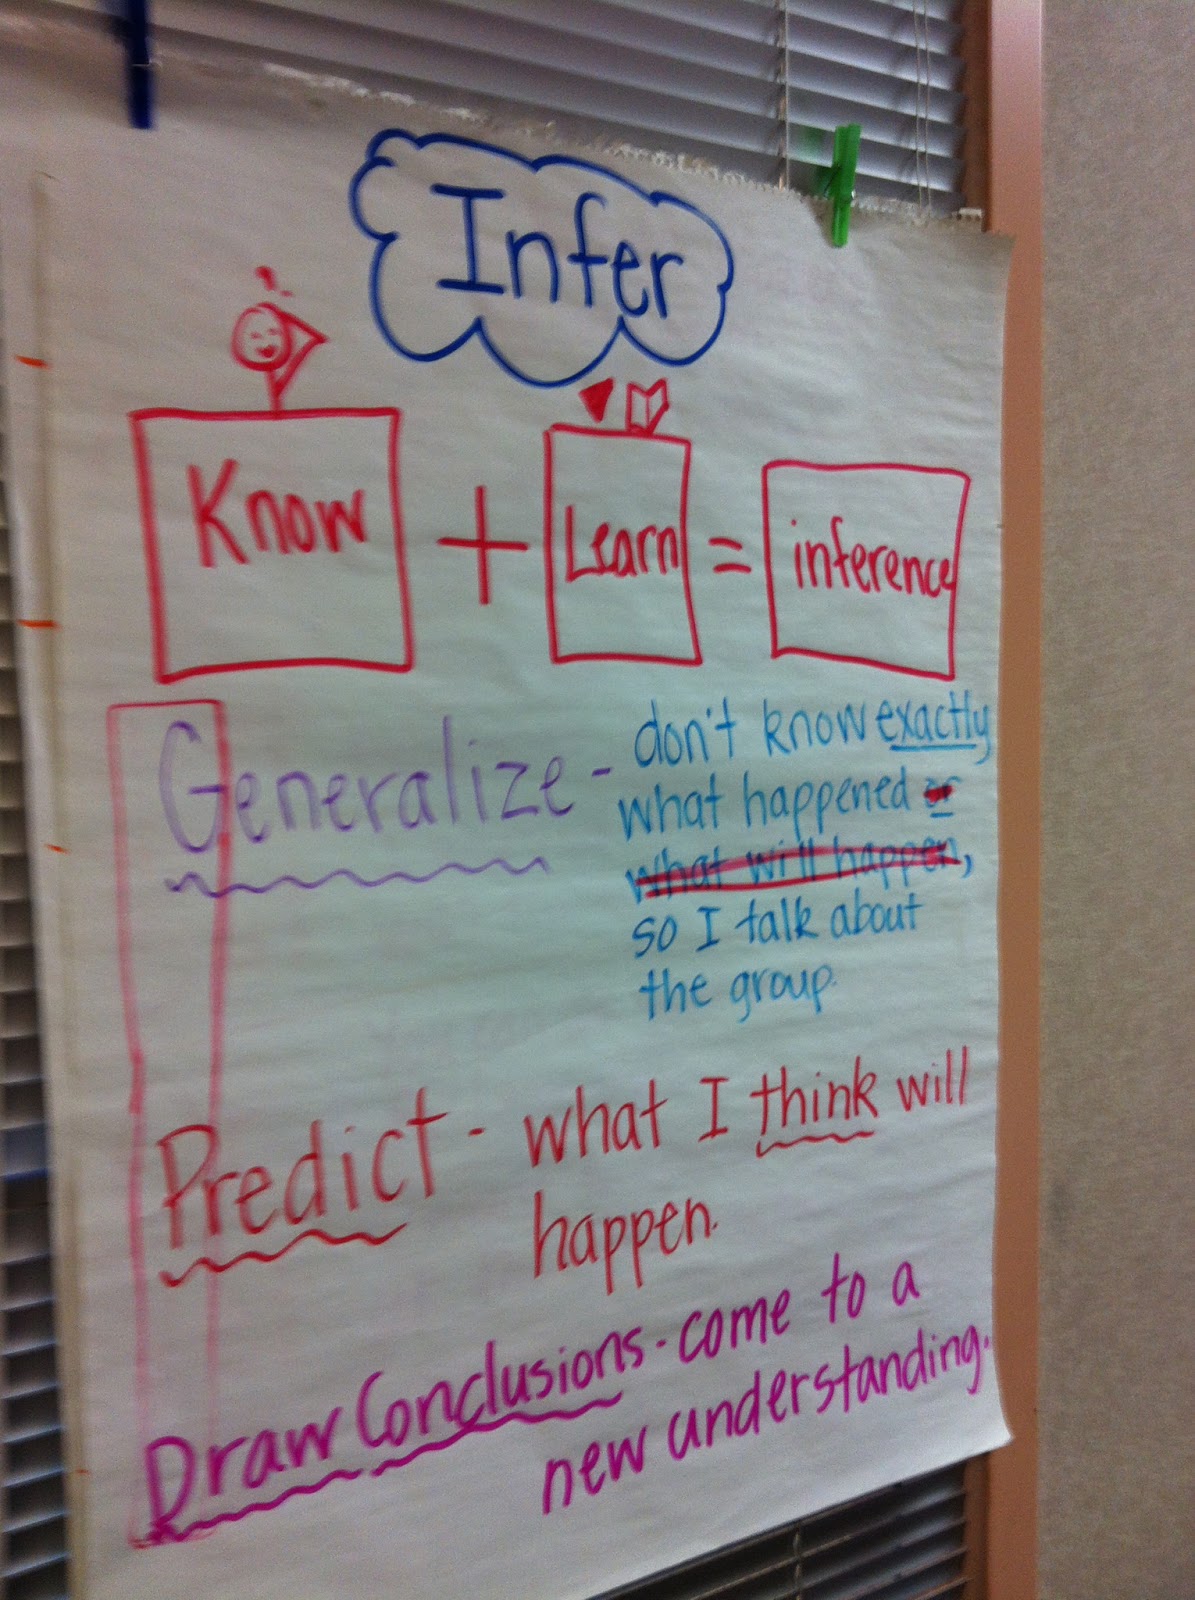 Drawing Conclusions Anchor Chart